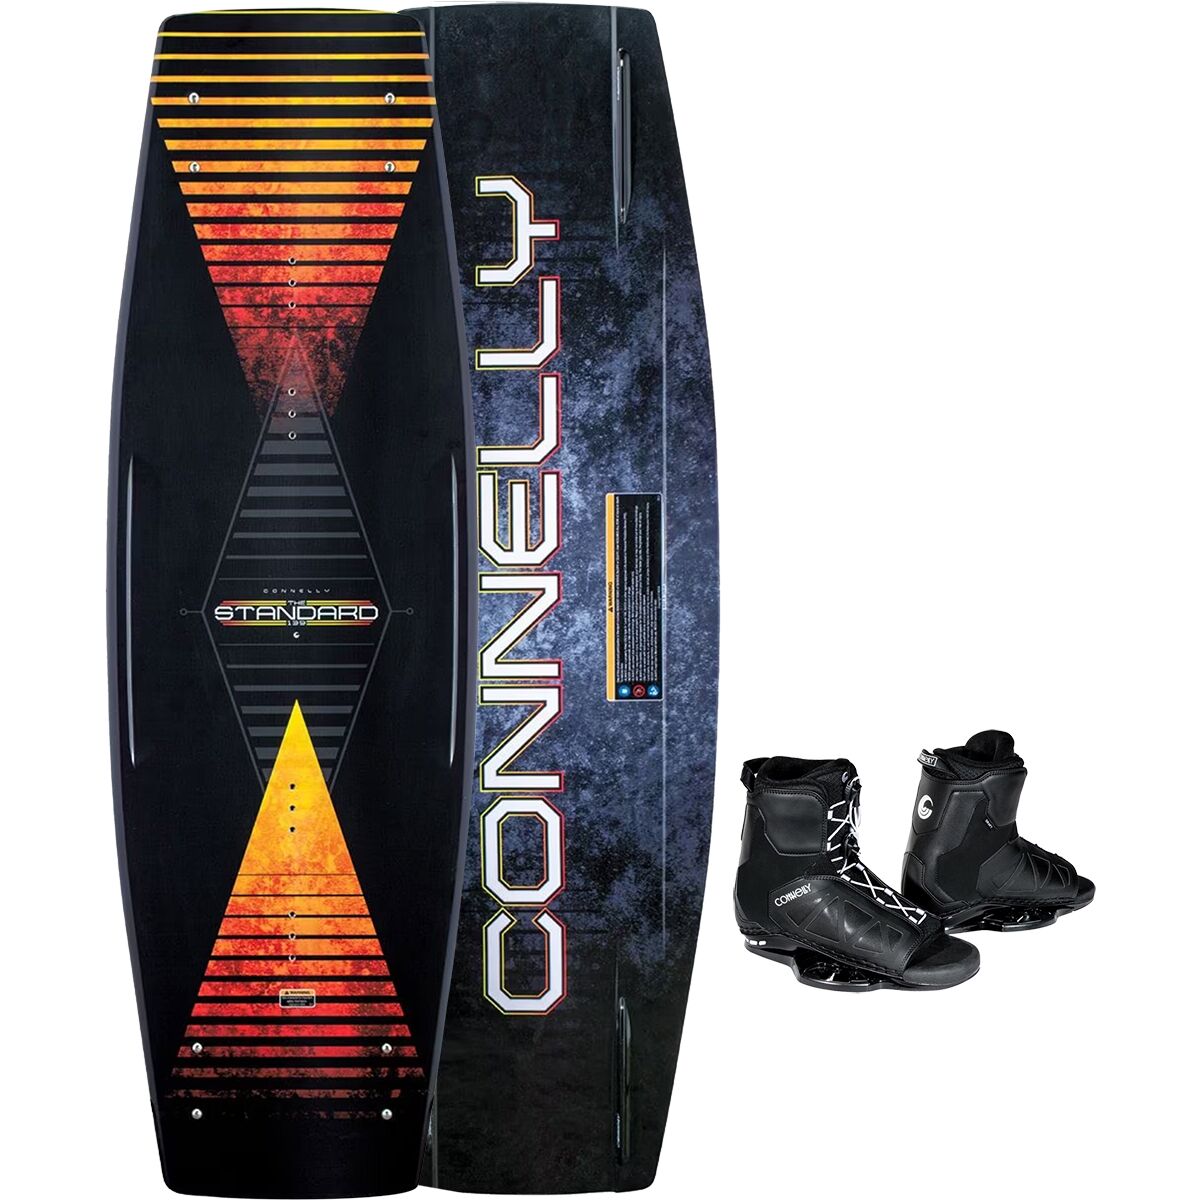 Connelly Skis Standard Wakeboard + Draft Binding